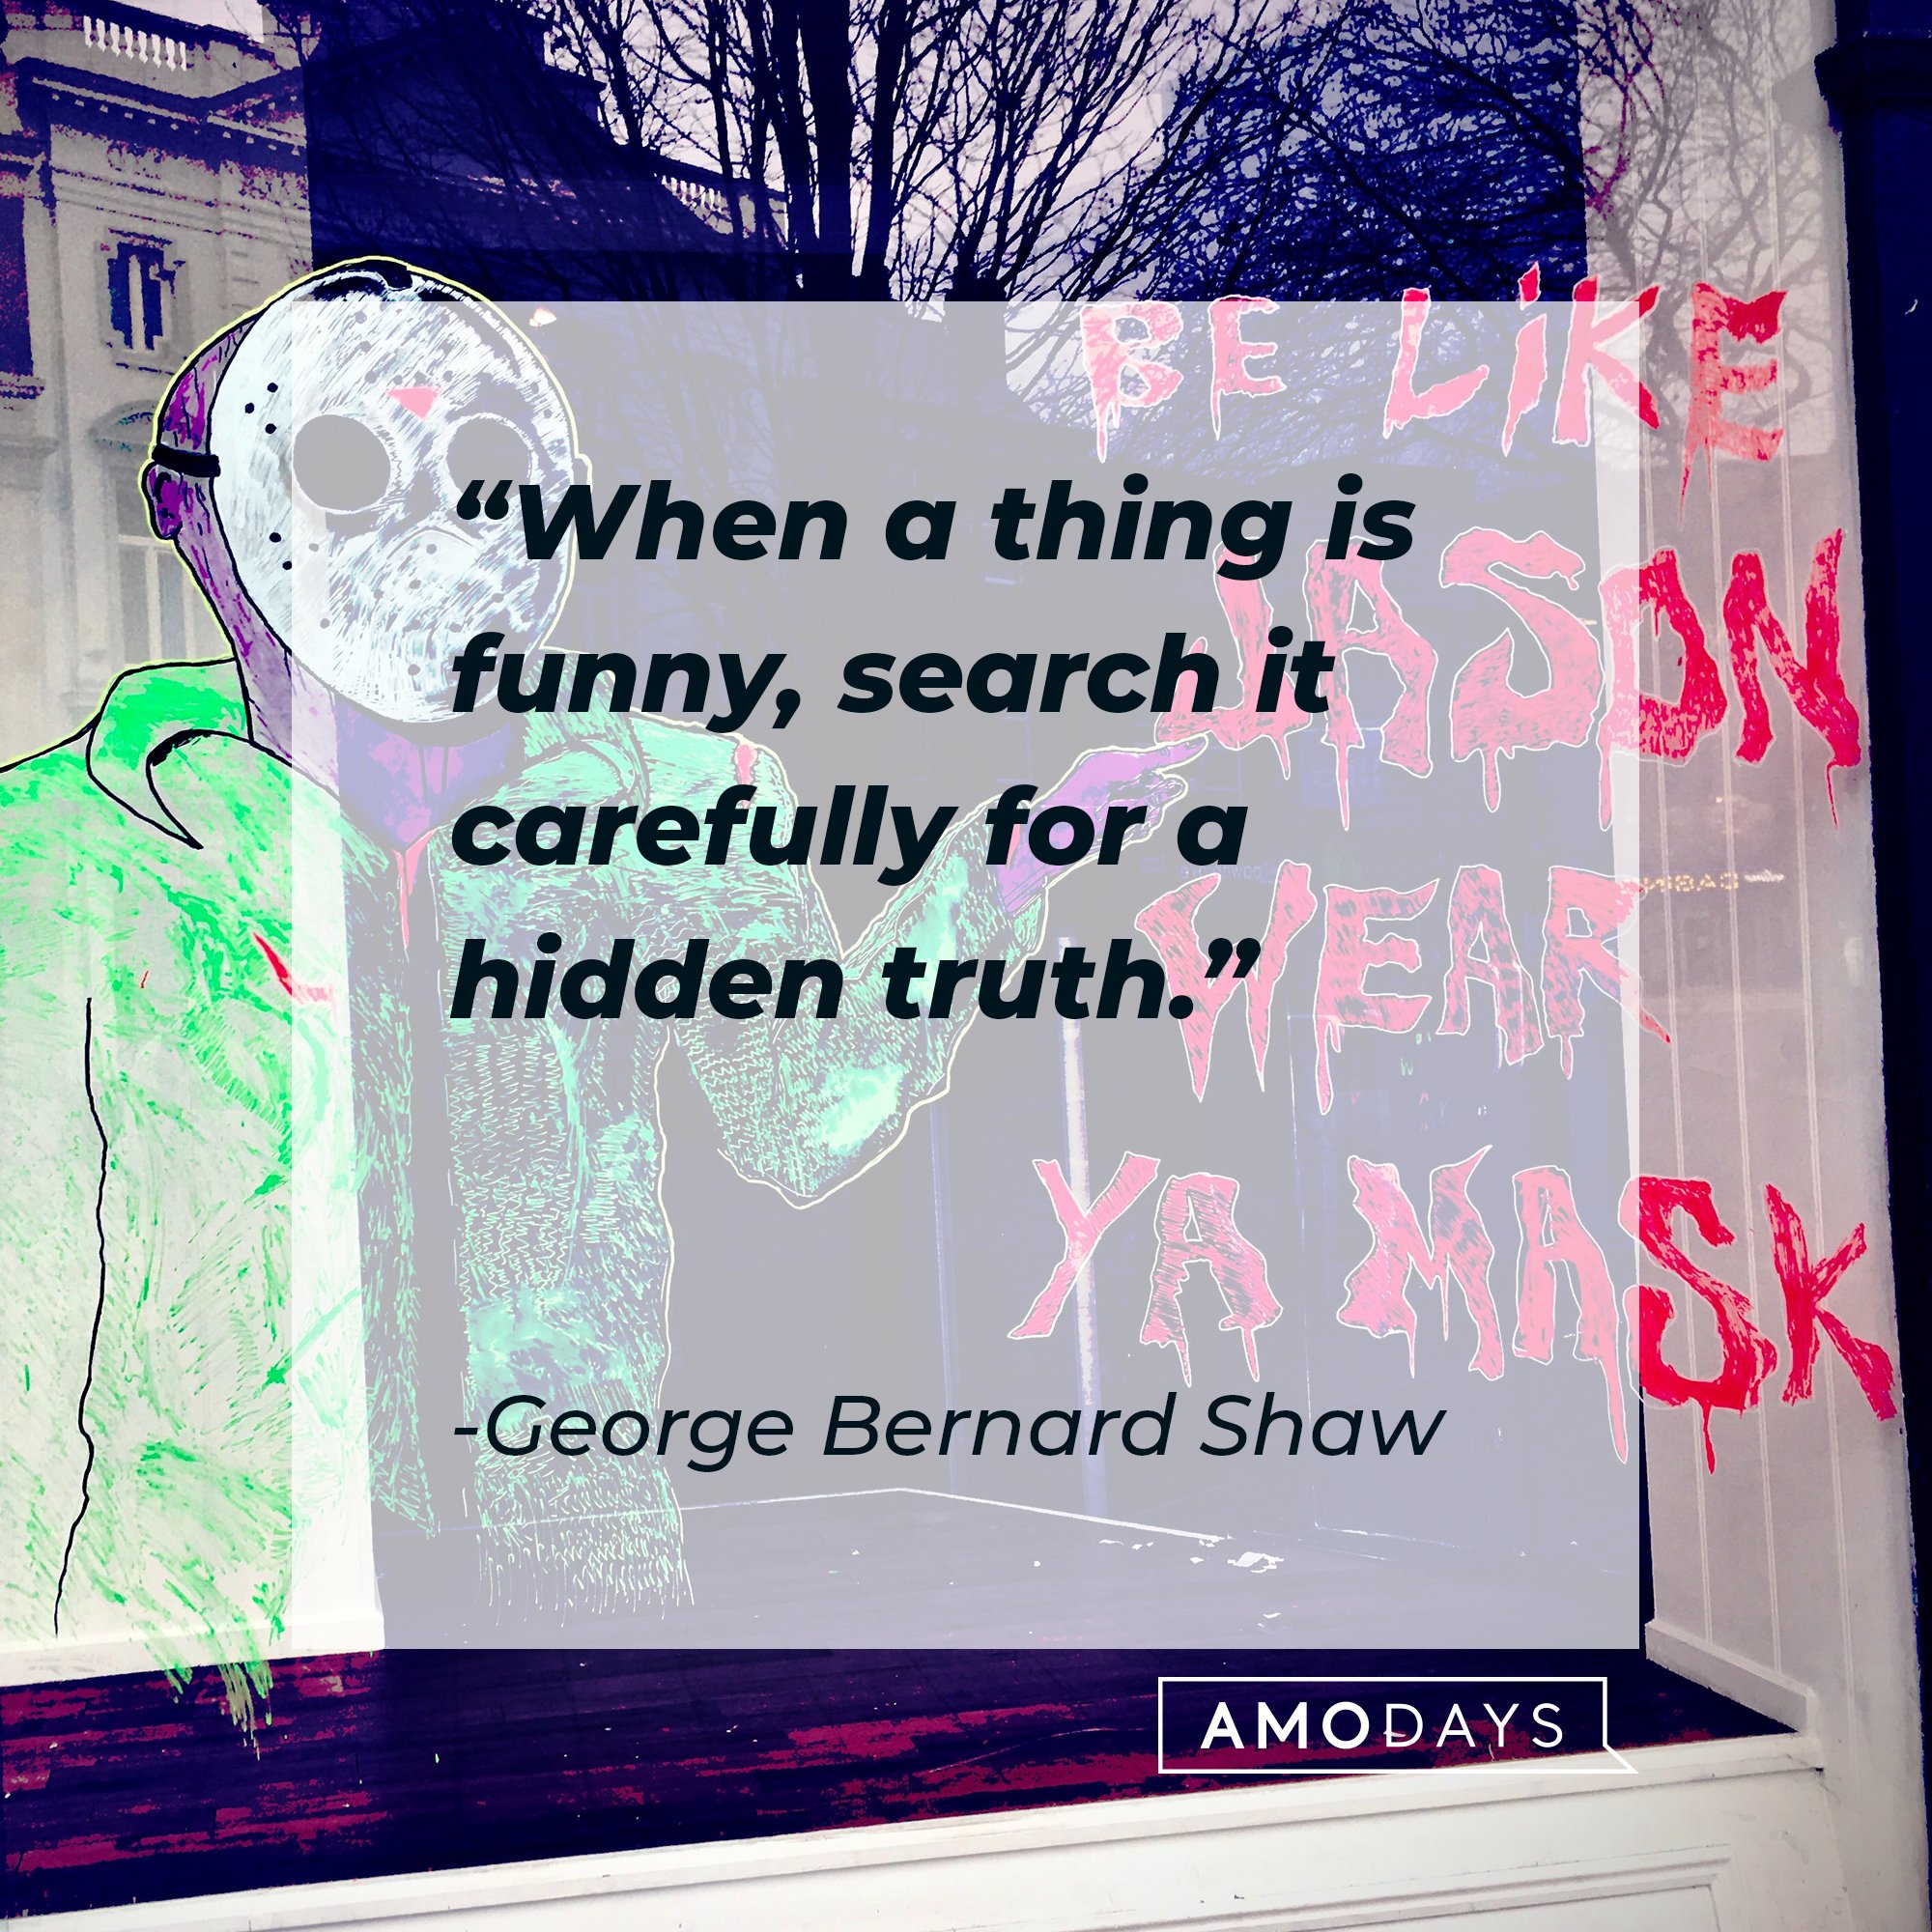 George Bernard Shaw’s quote: "When a thing is funny, search it carefully for a hidden truth." | Image: AmoDays